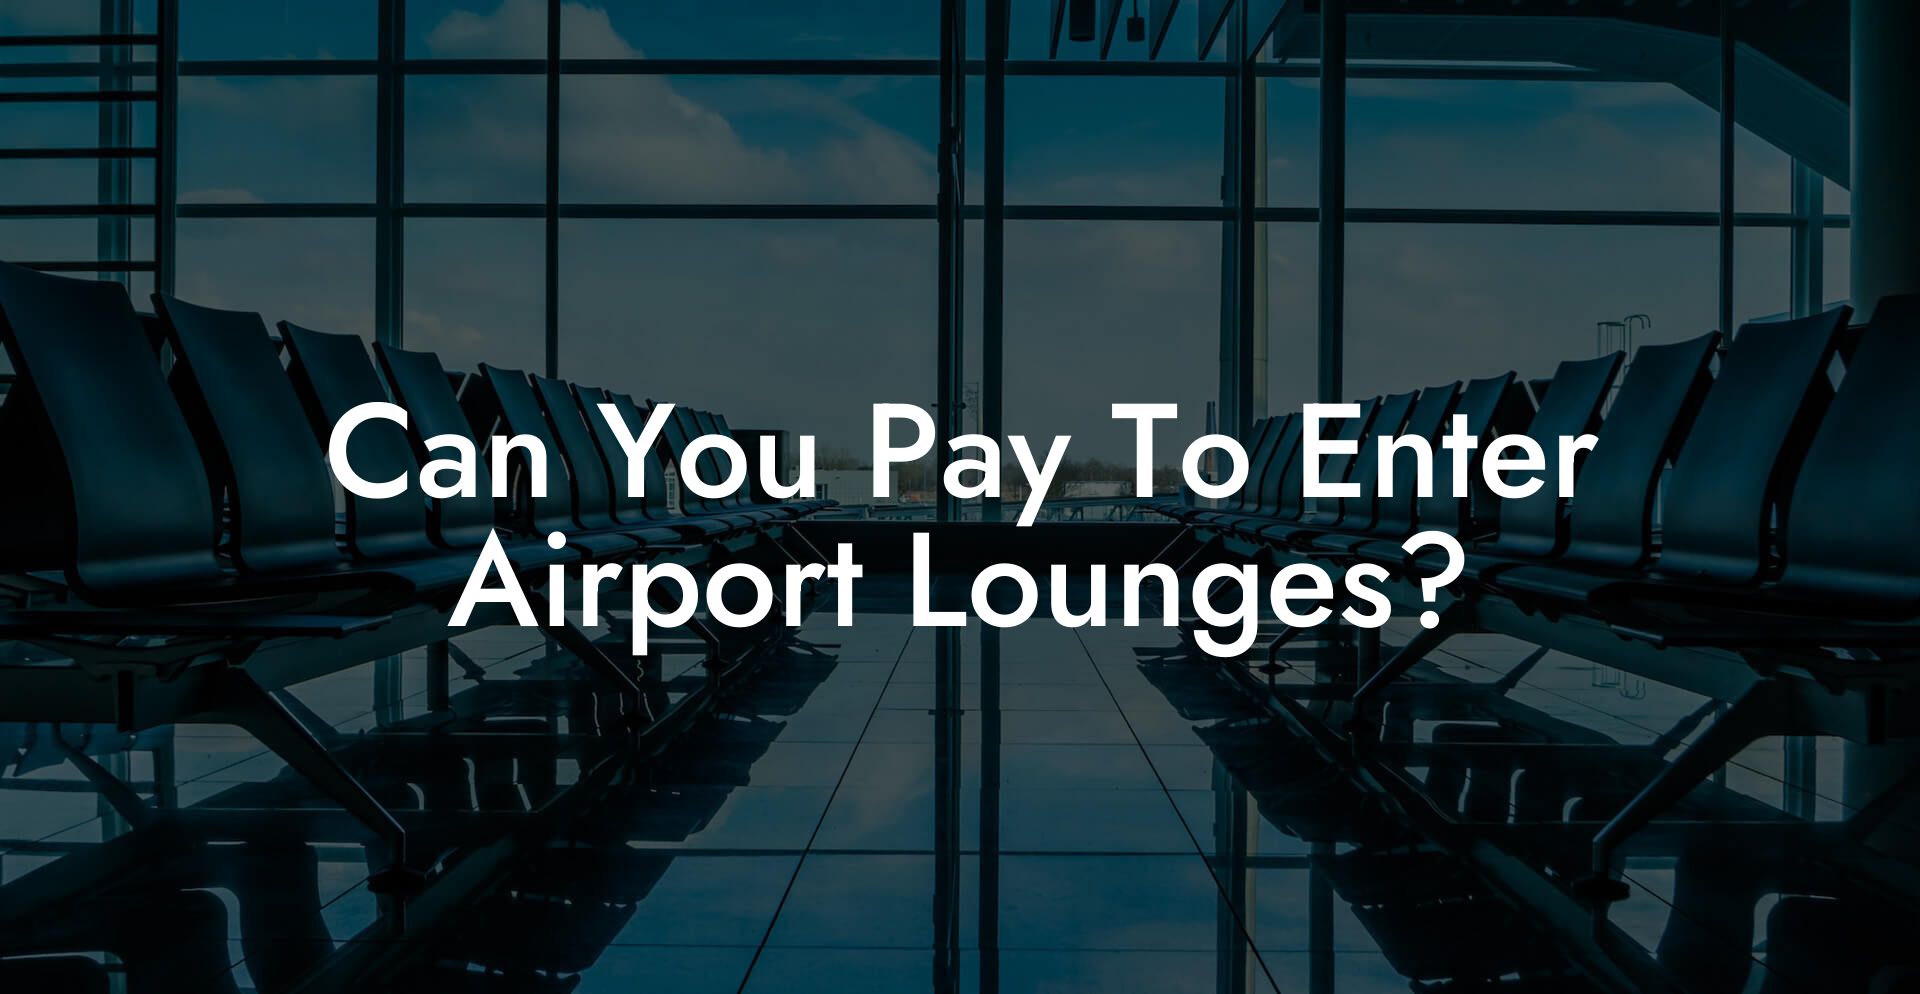 Can You Pay To Enter Airport Lounges?